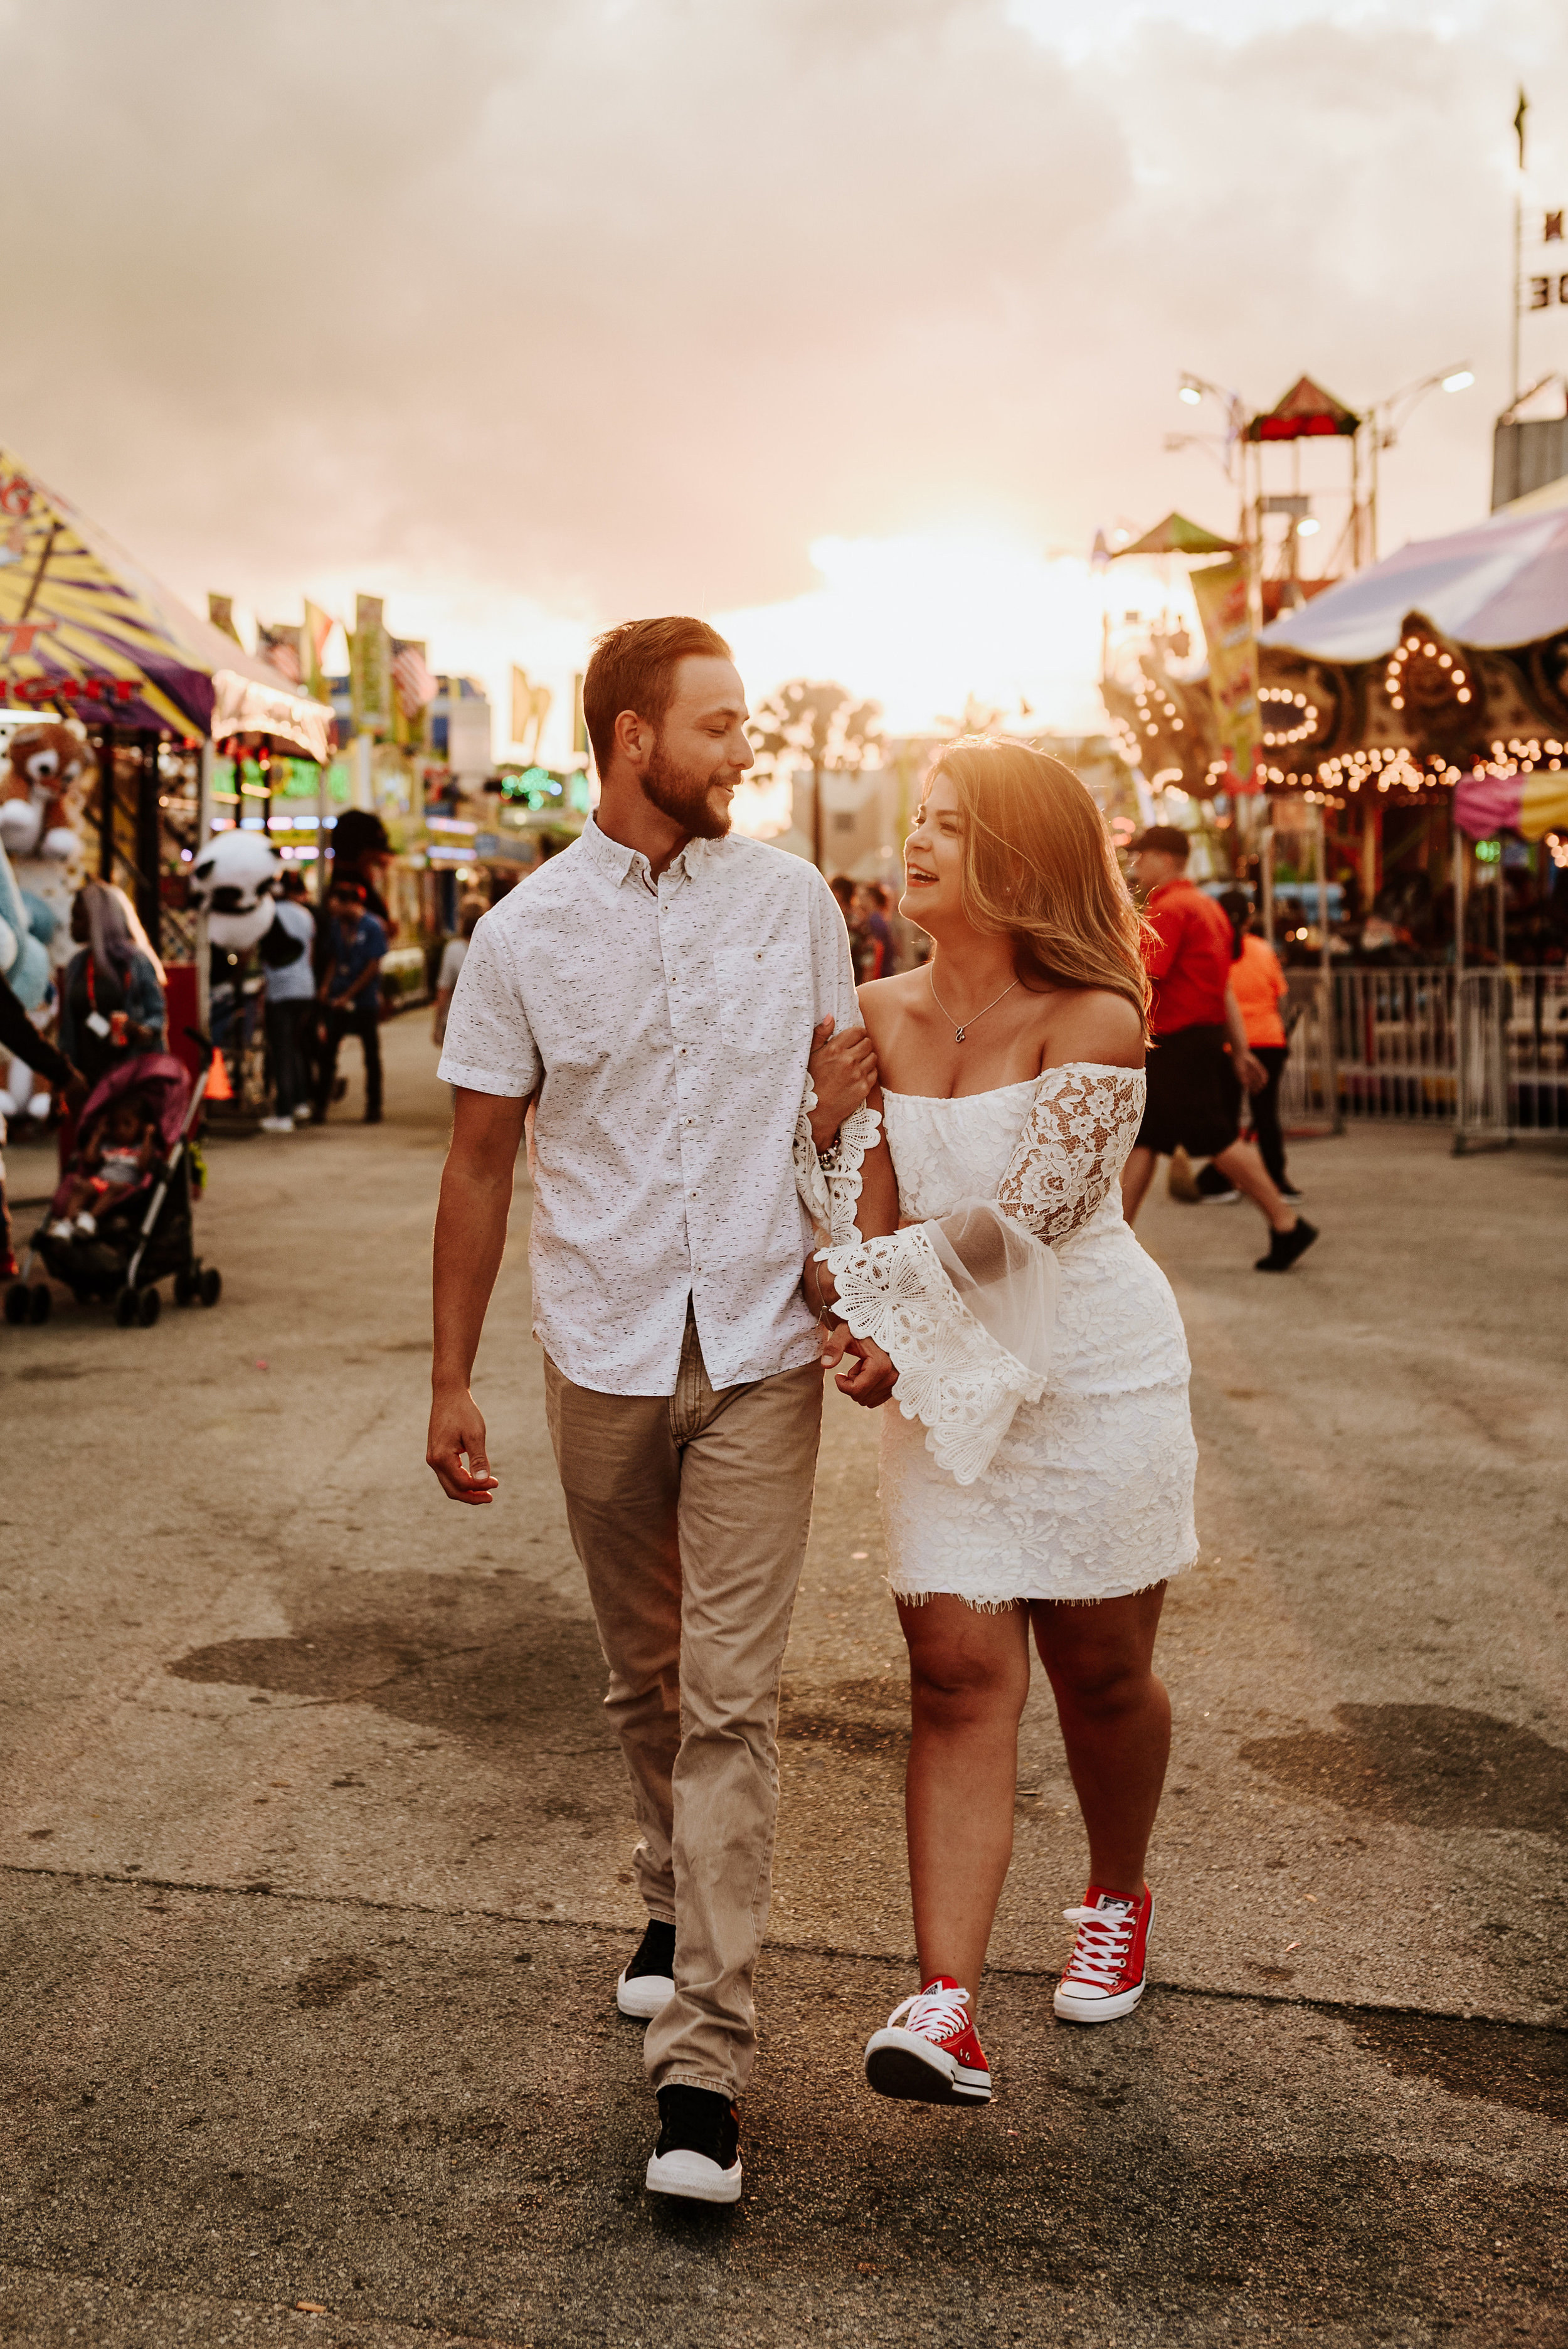 Ana_Justin_Engagement_Session_Miami_Dade_Fair_Photography_by_V_3416.jpg